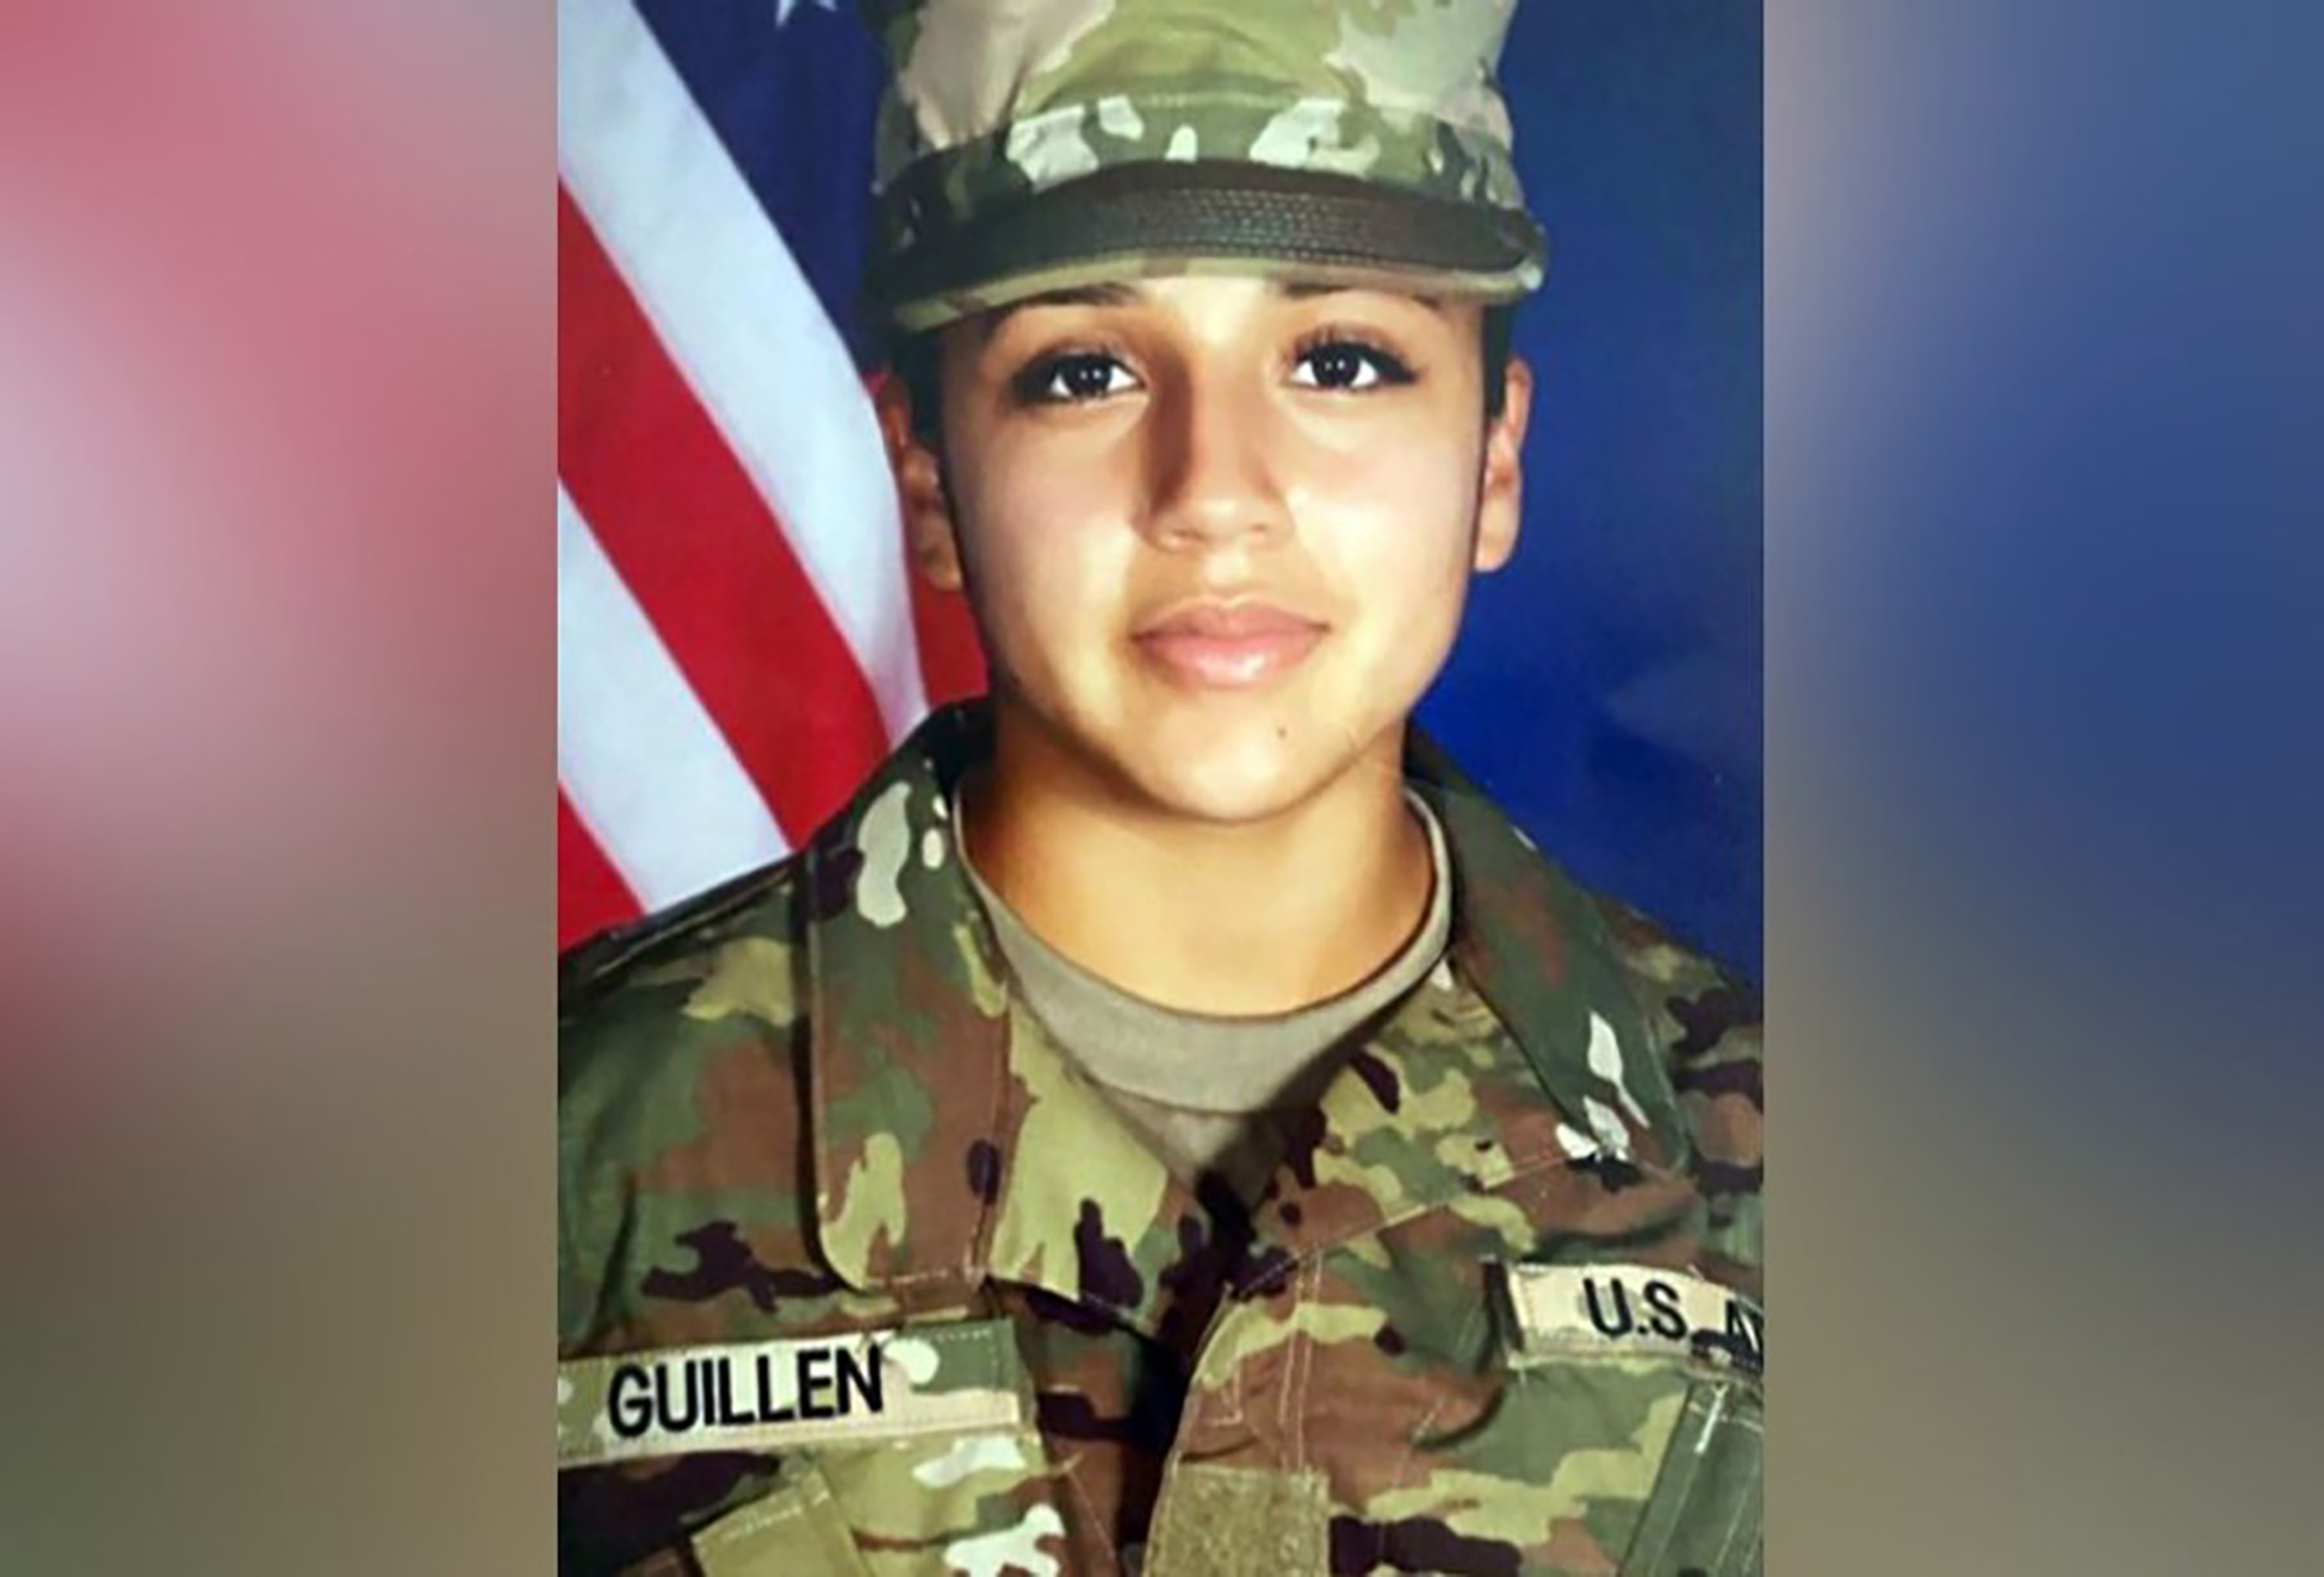 Army Pfc. Vanessa Guillen, 20, has been missing from her unit since April 22, 2020, according to the U.S. Army Criminal Investigation Command. (U.S. ARMY/The New York Times/Redux)